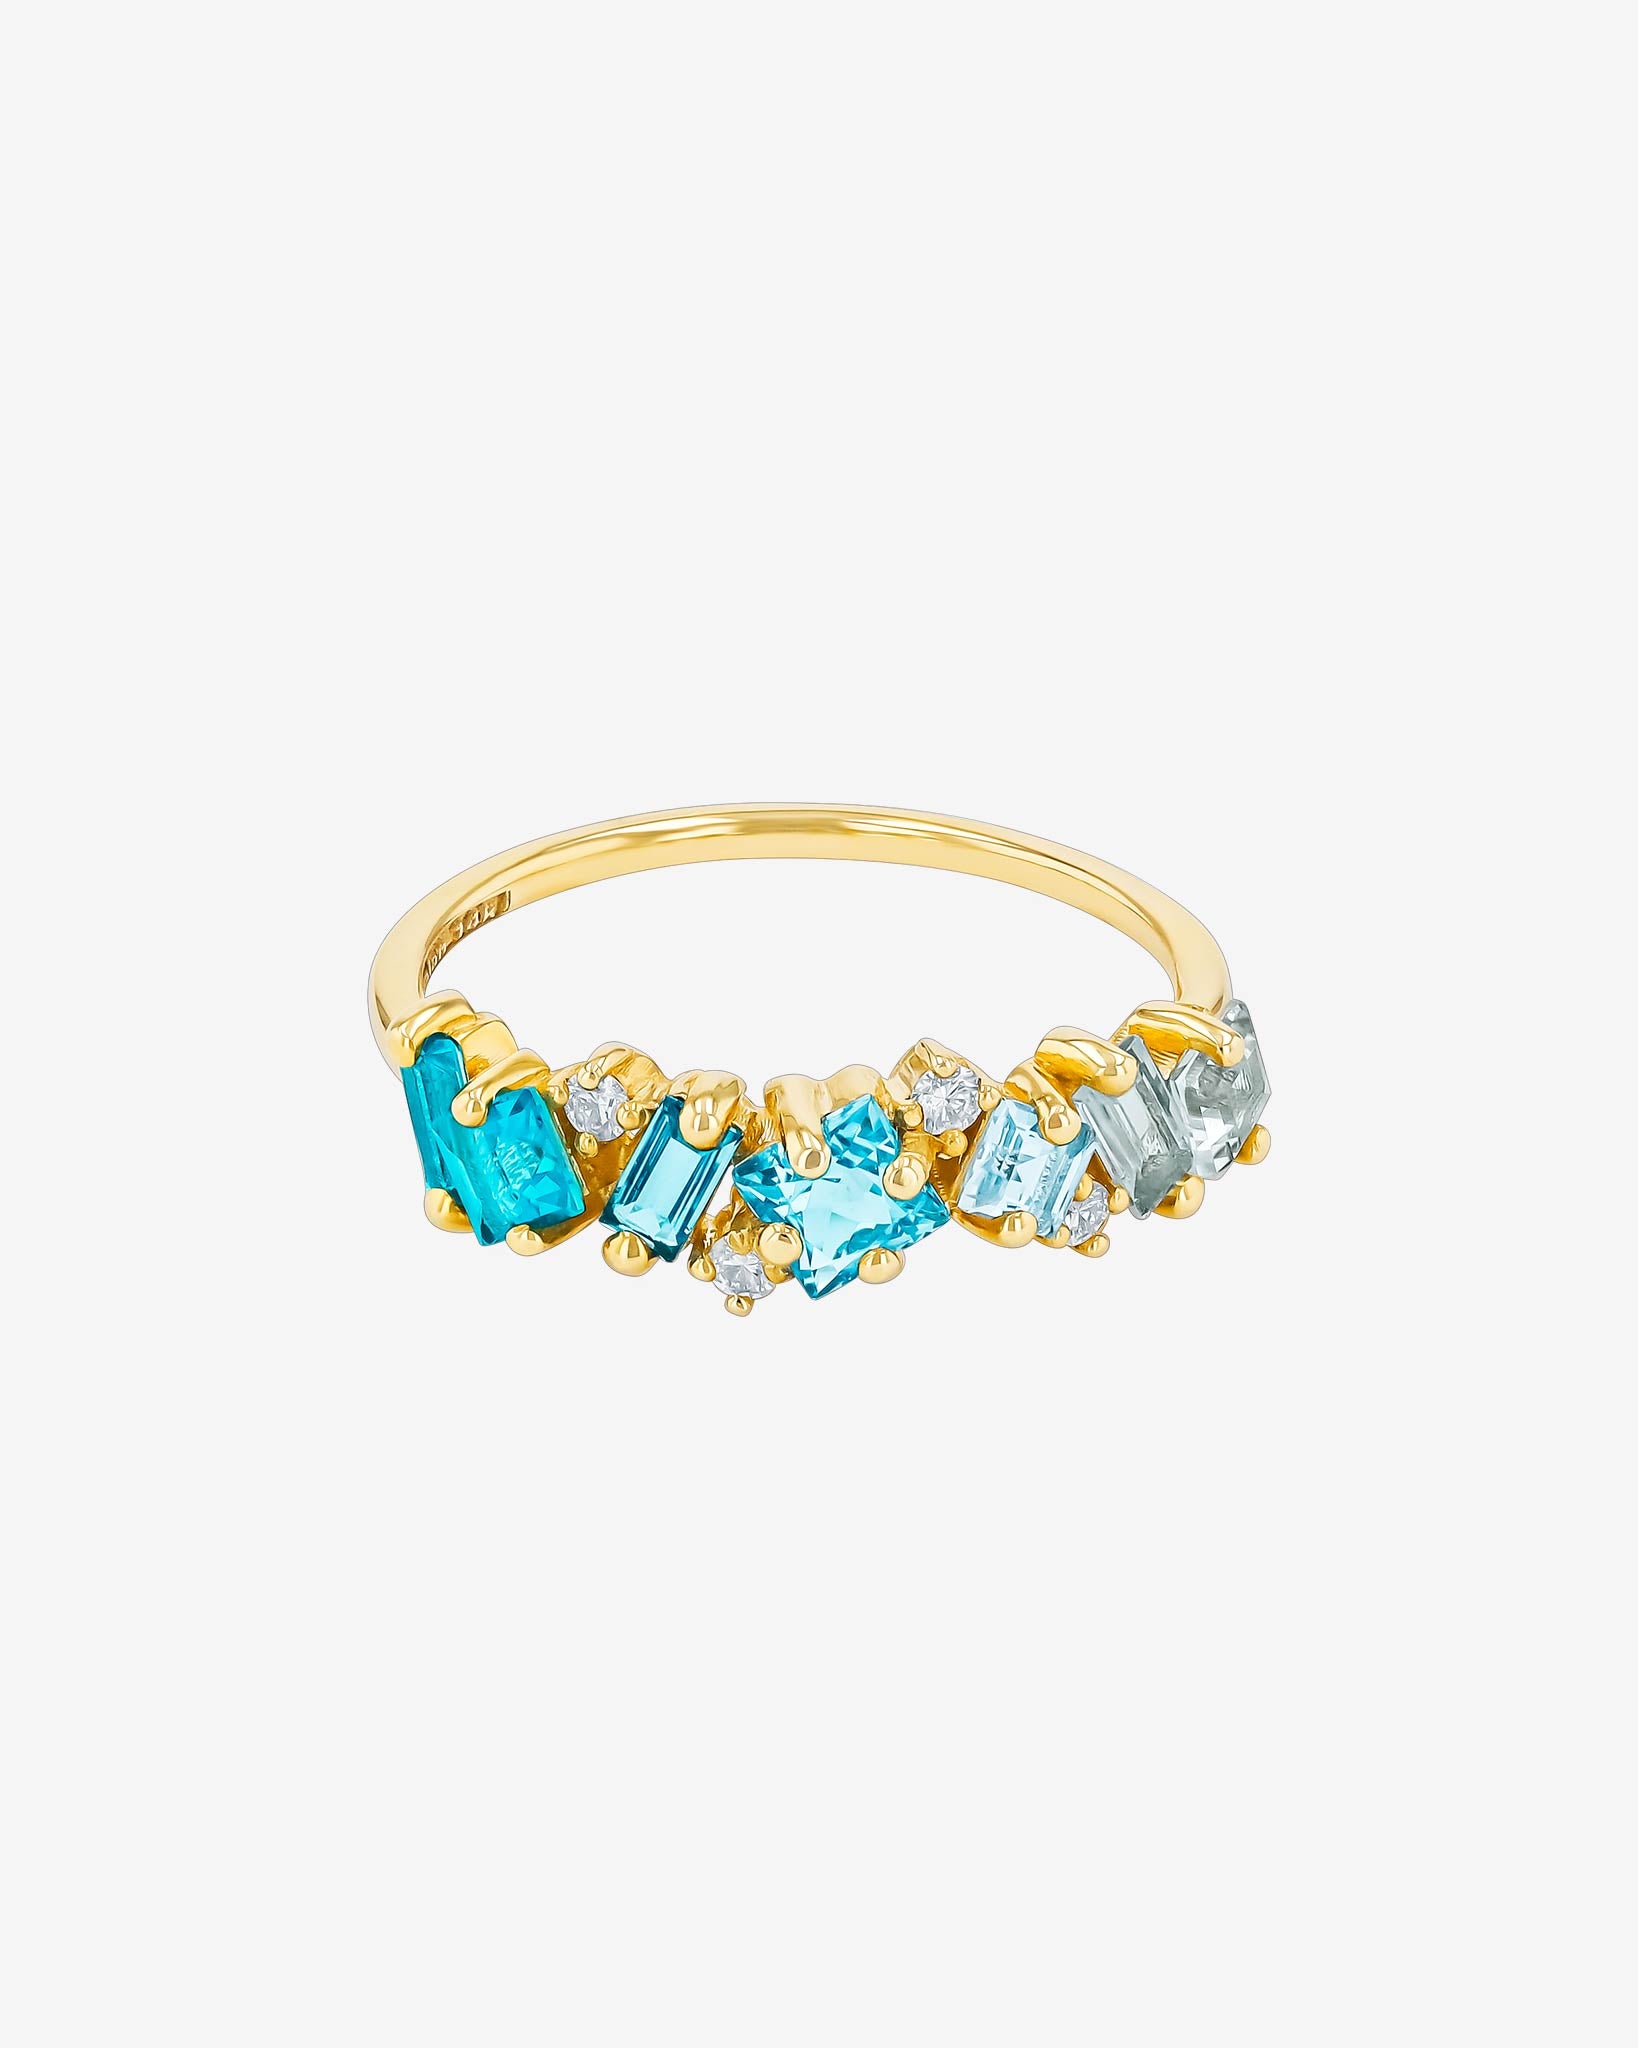 Kalan By Suzanne Kalan Nadima Light Blue Ombre Half Band in 14k yellow gold